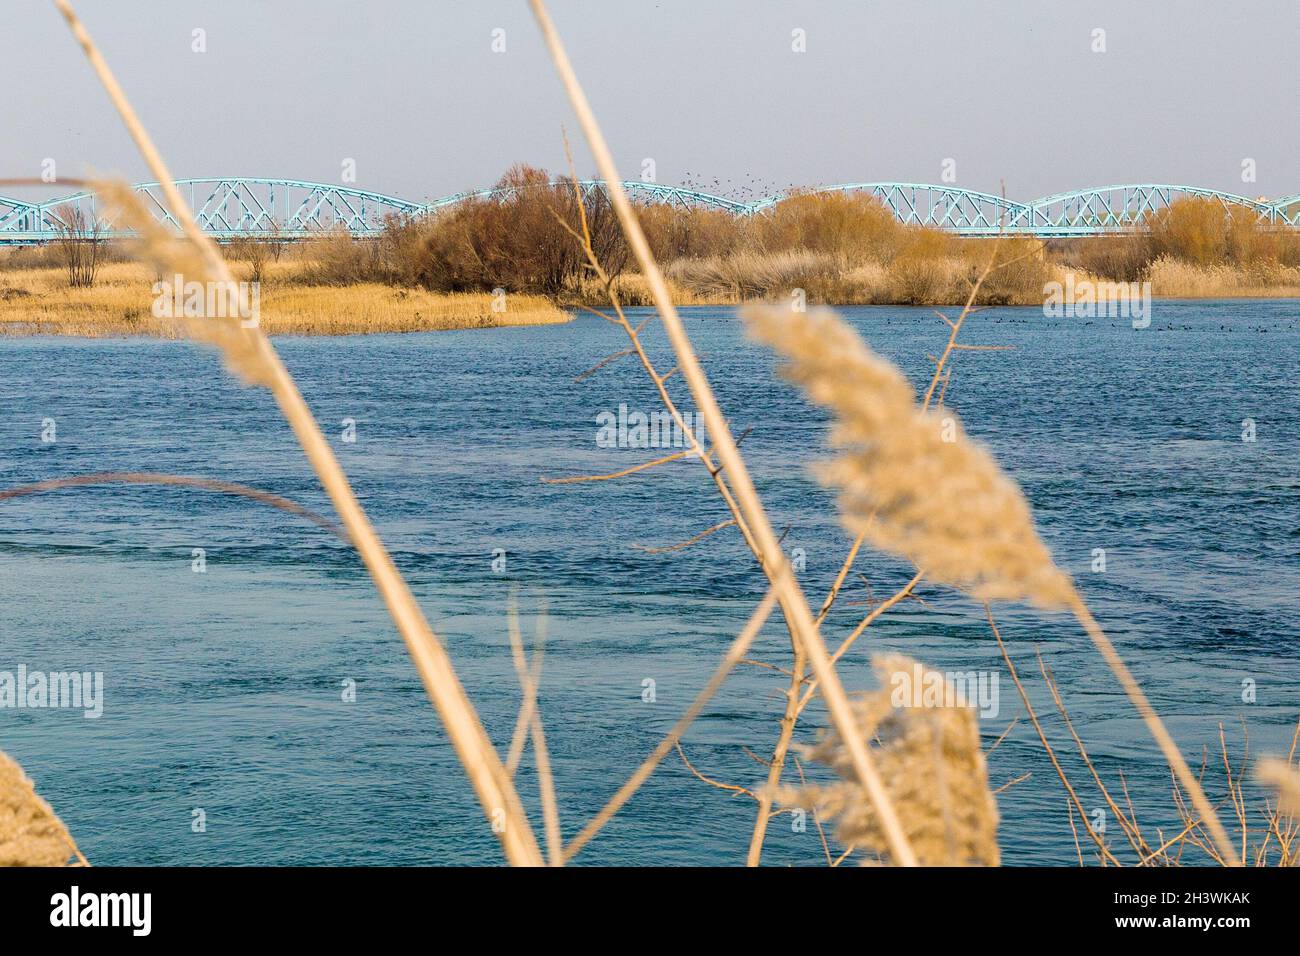 General view of the Euphrates river and the railway bridge over it in Jarablus city of Aleppo, Syria. Stock Photo